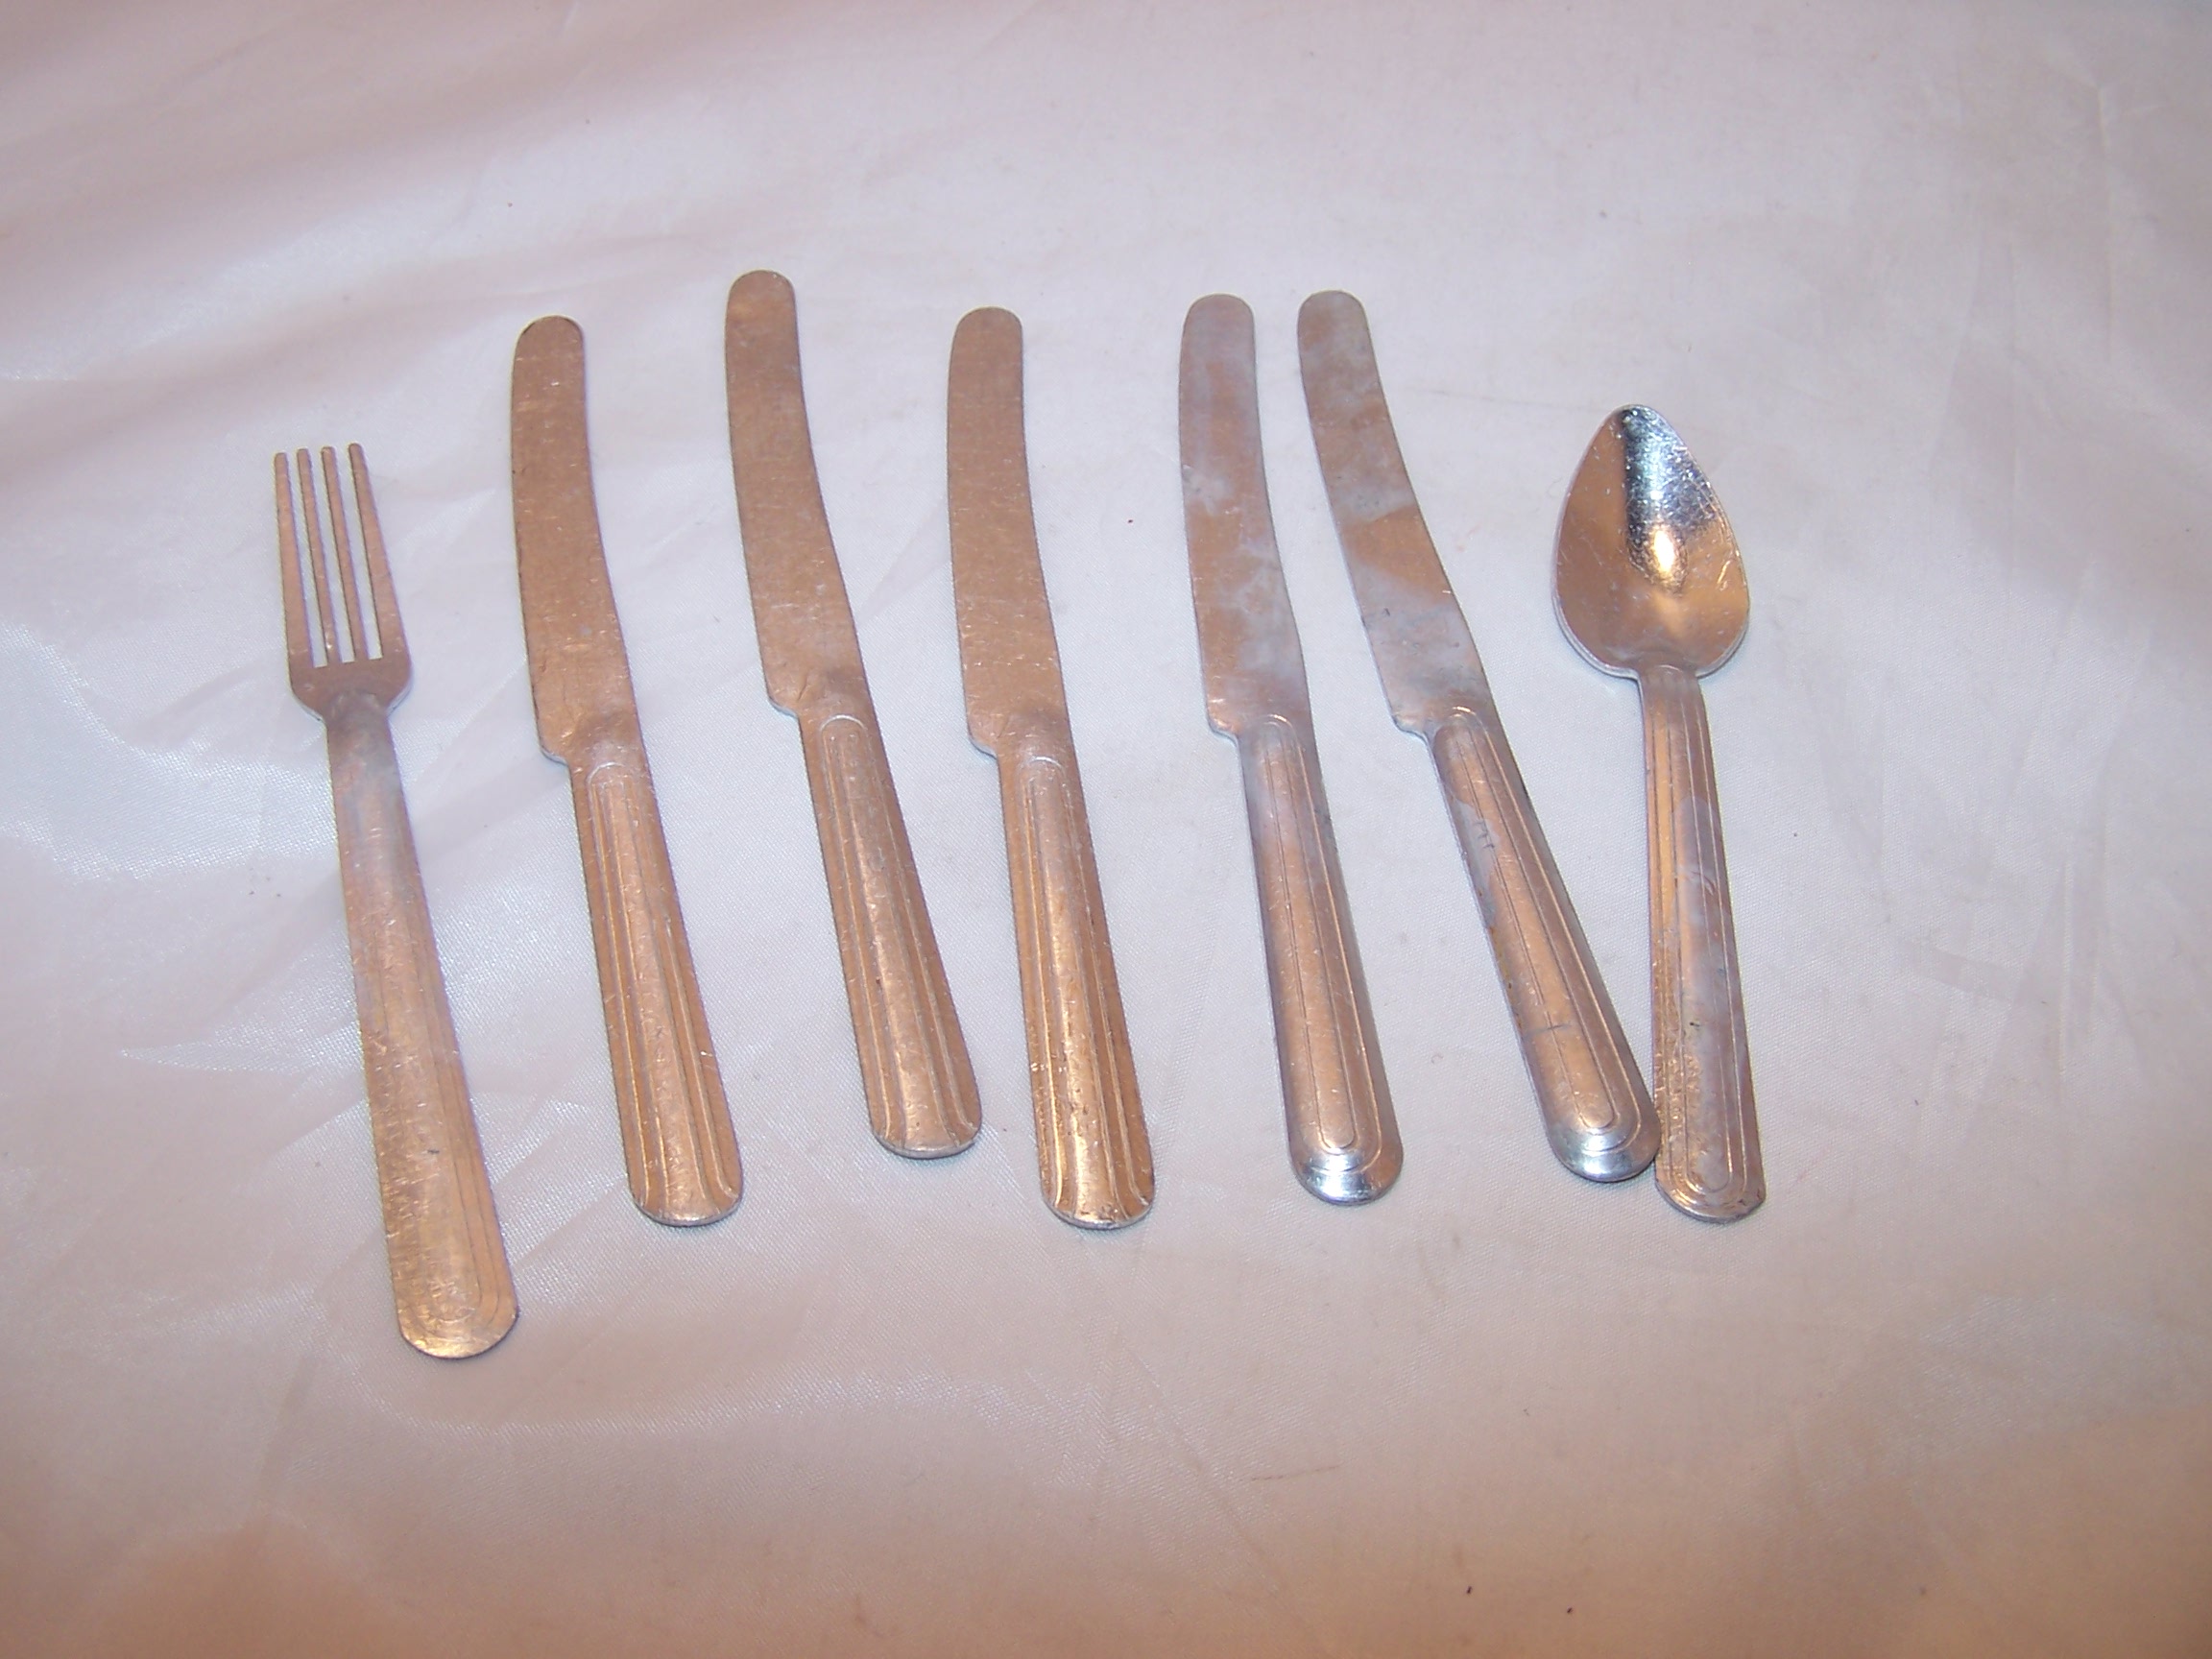 Toy Utensils, Aluminum, Vintage Toy, Group A